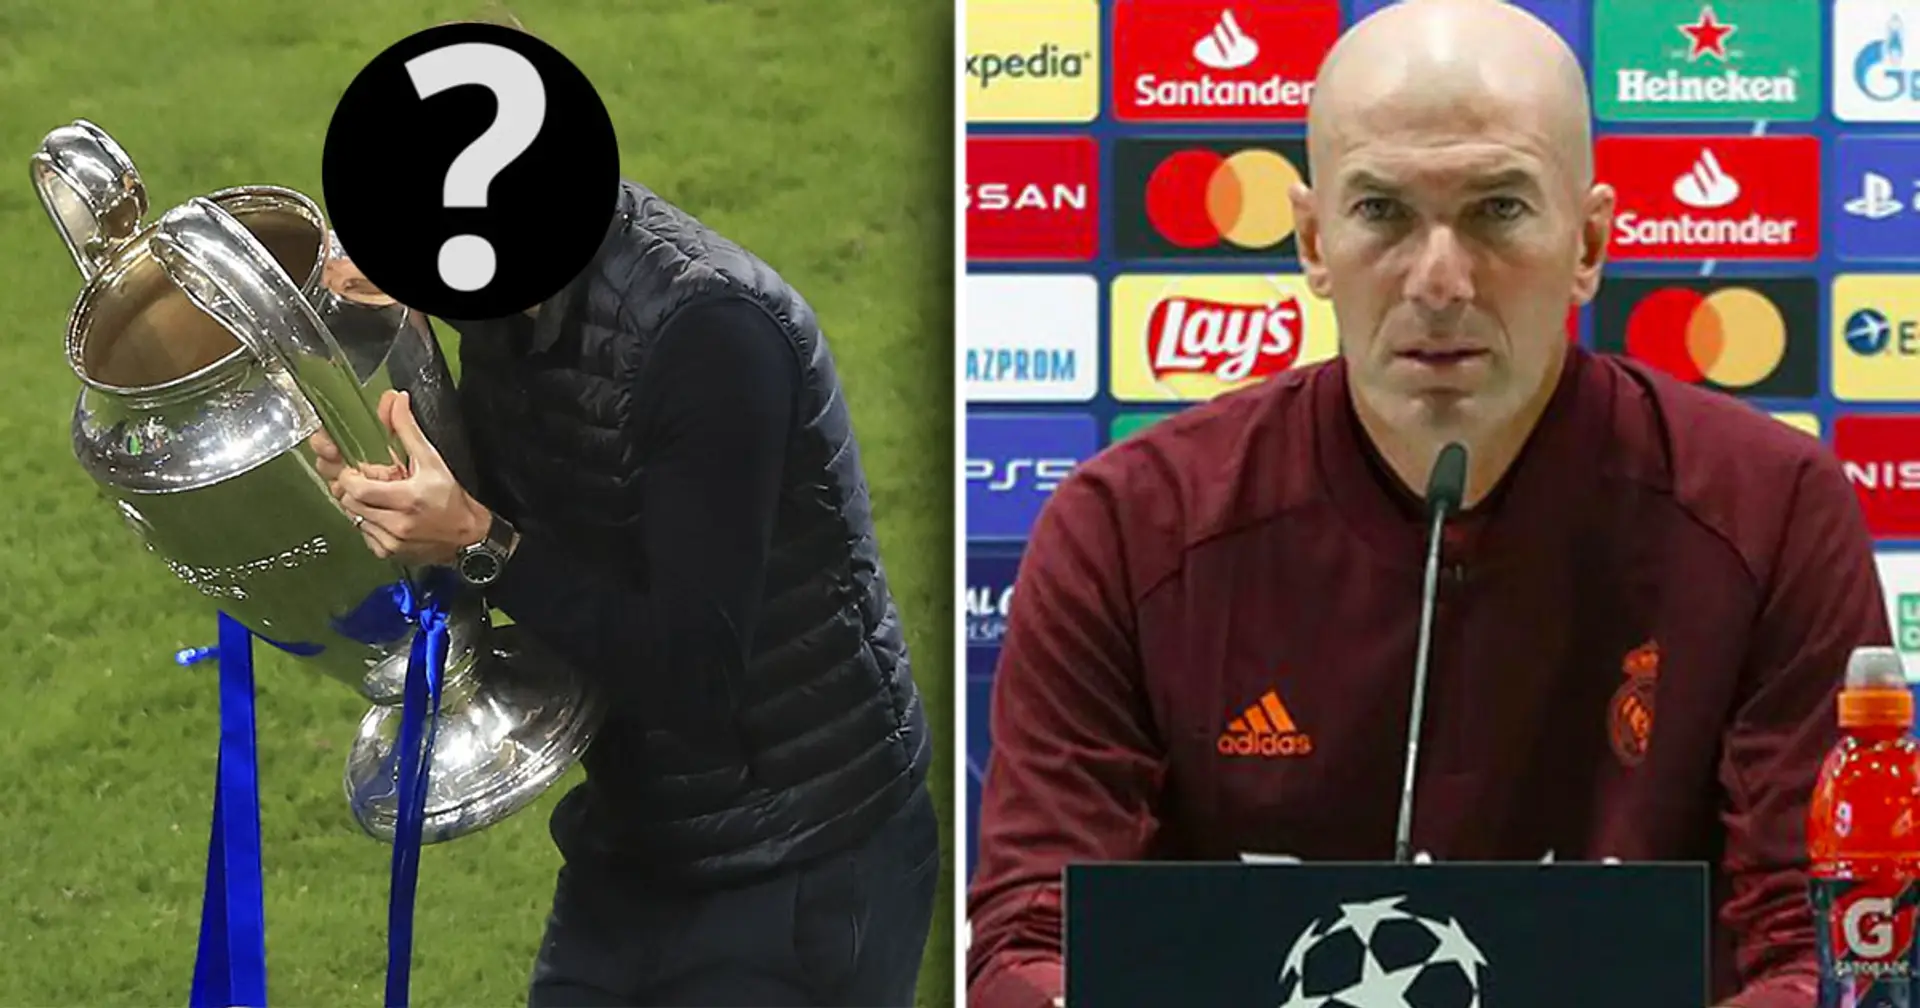 Champions League-winning manager targets Real Madrid job, it's not Zidane (reliability: 5 stars)